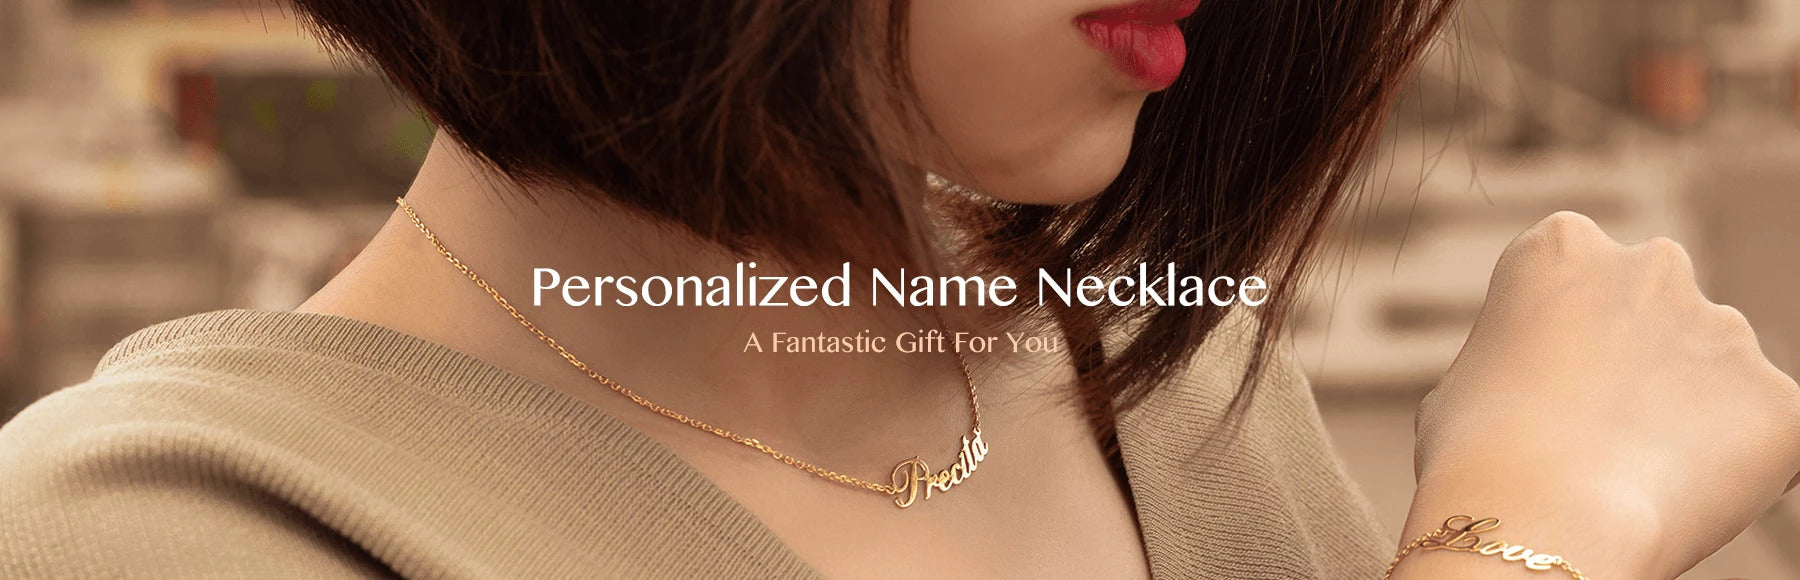 personalised name necklace banner